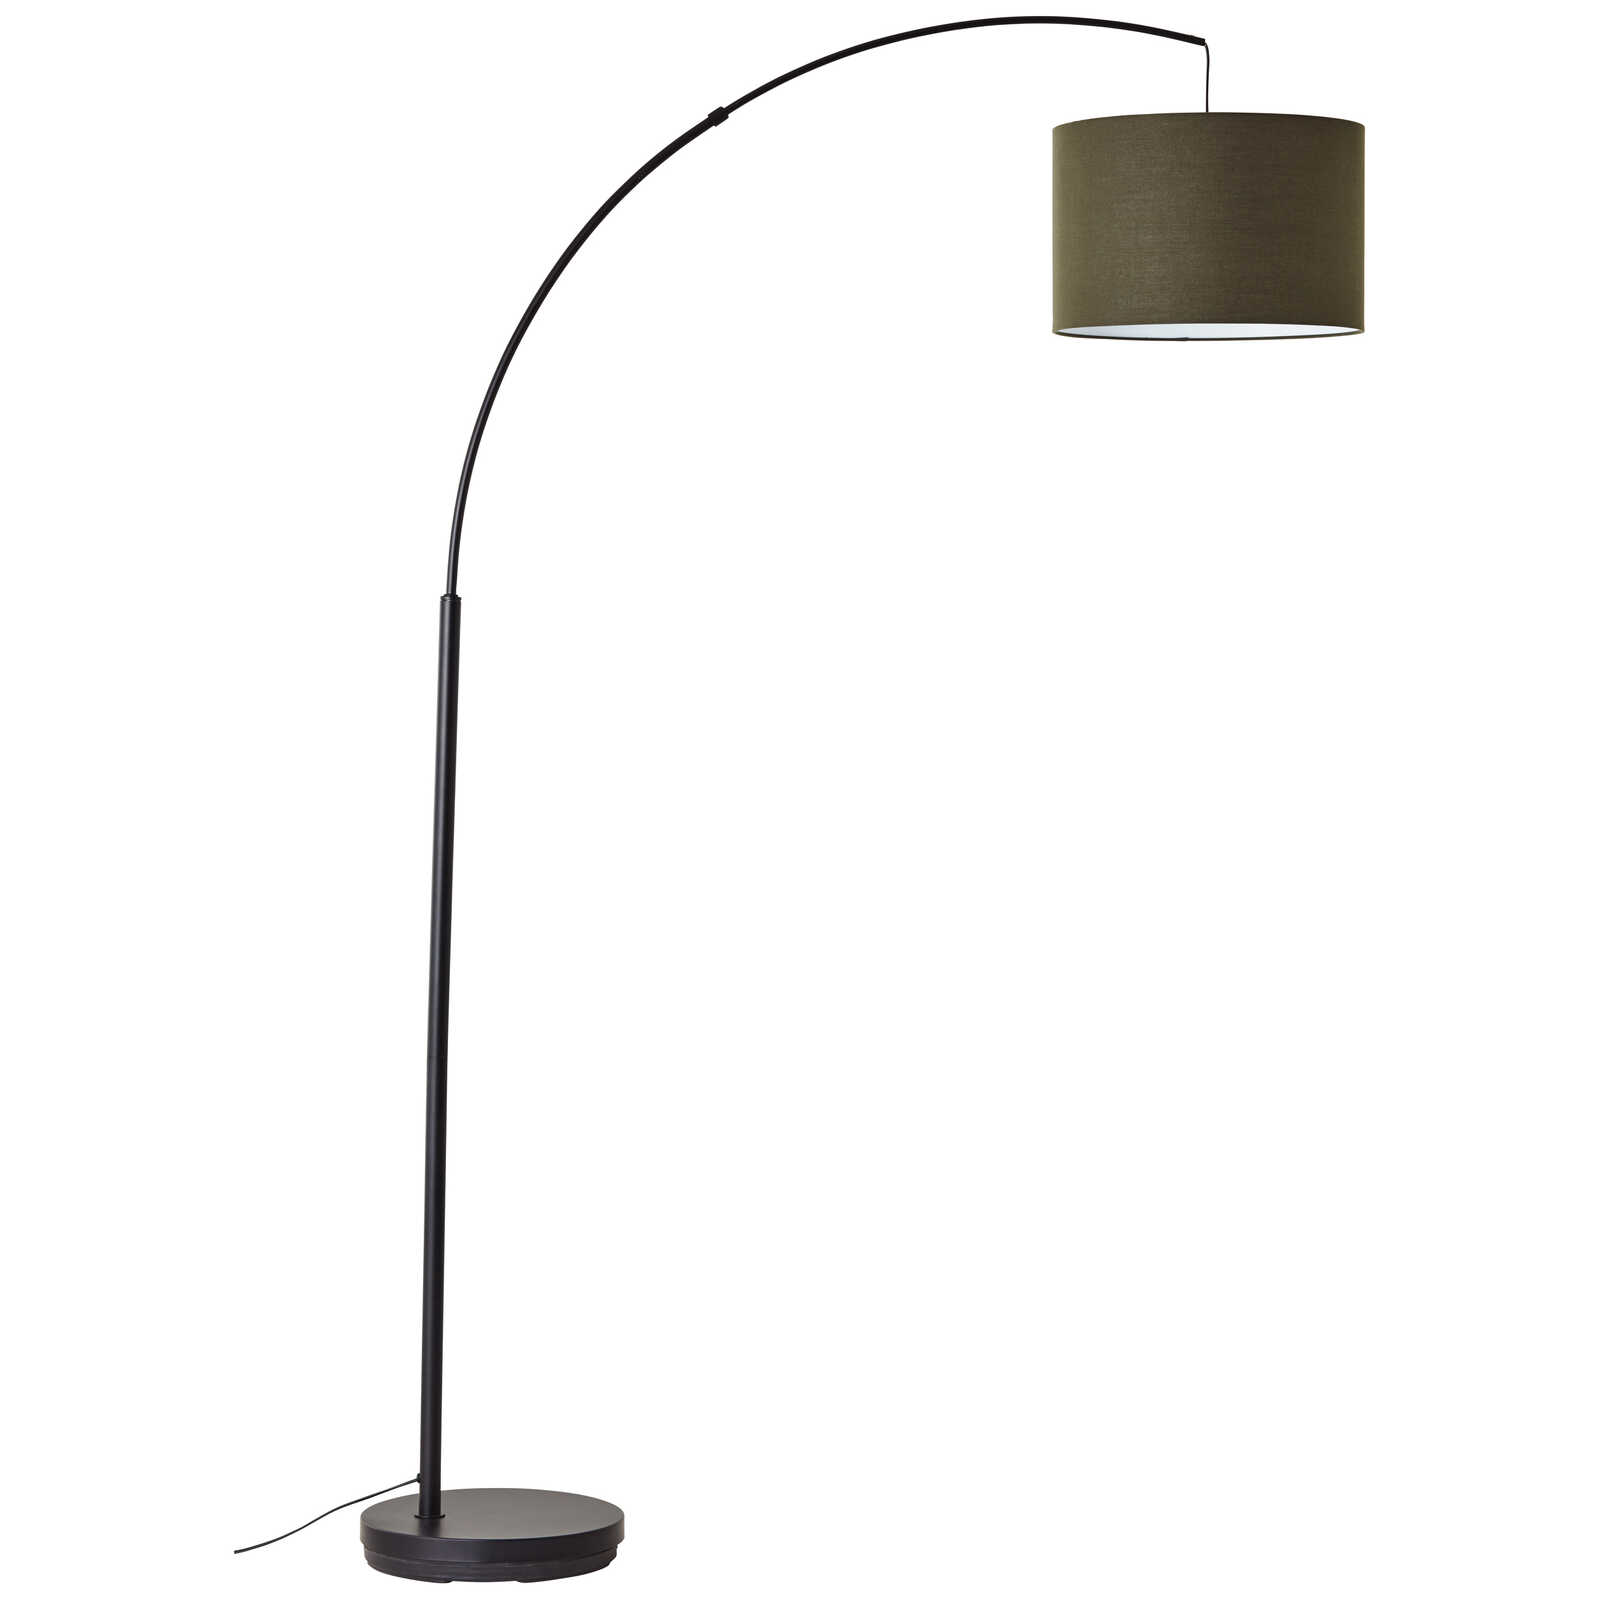             Arched textile floor lamp - Ada 1 - Green
        